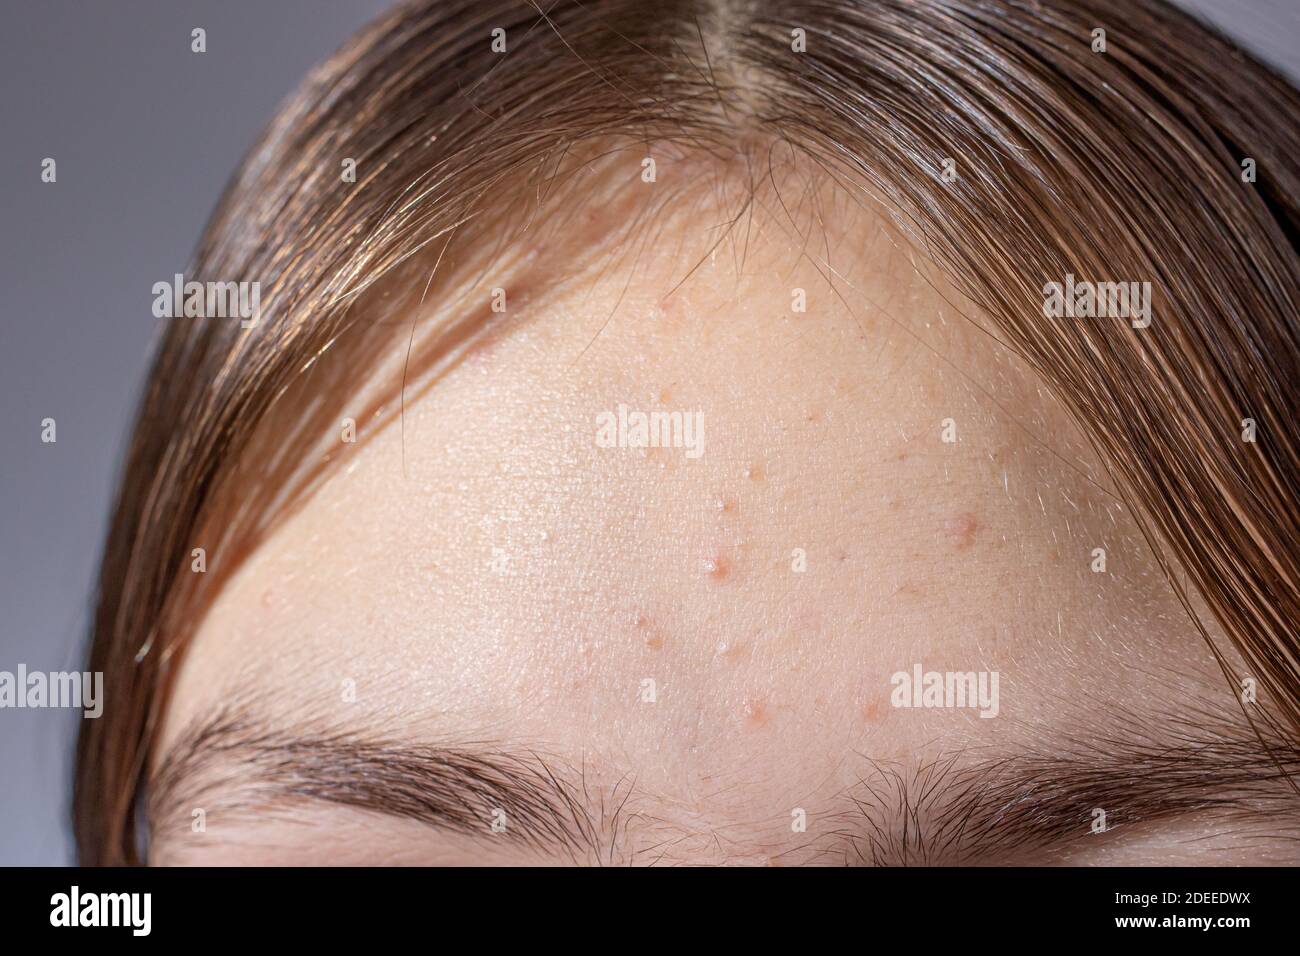 Acne on the forehead of a teenage girl - skin problems in children, acne treatment in dermatology Stock Photo